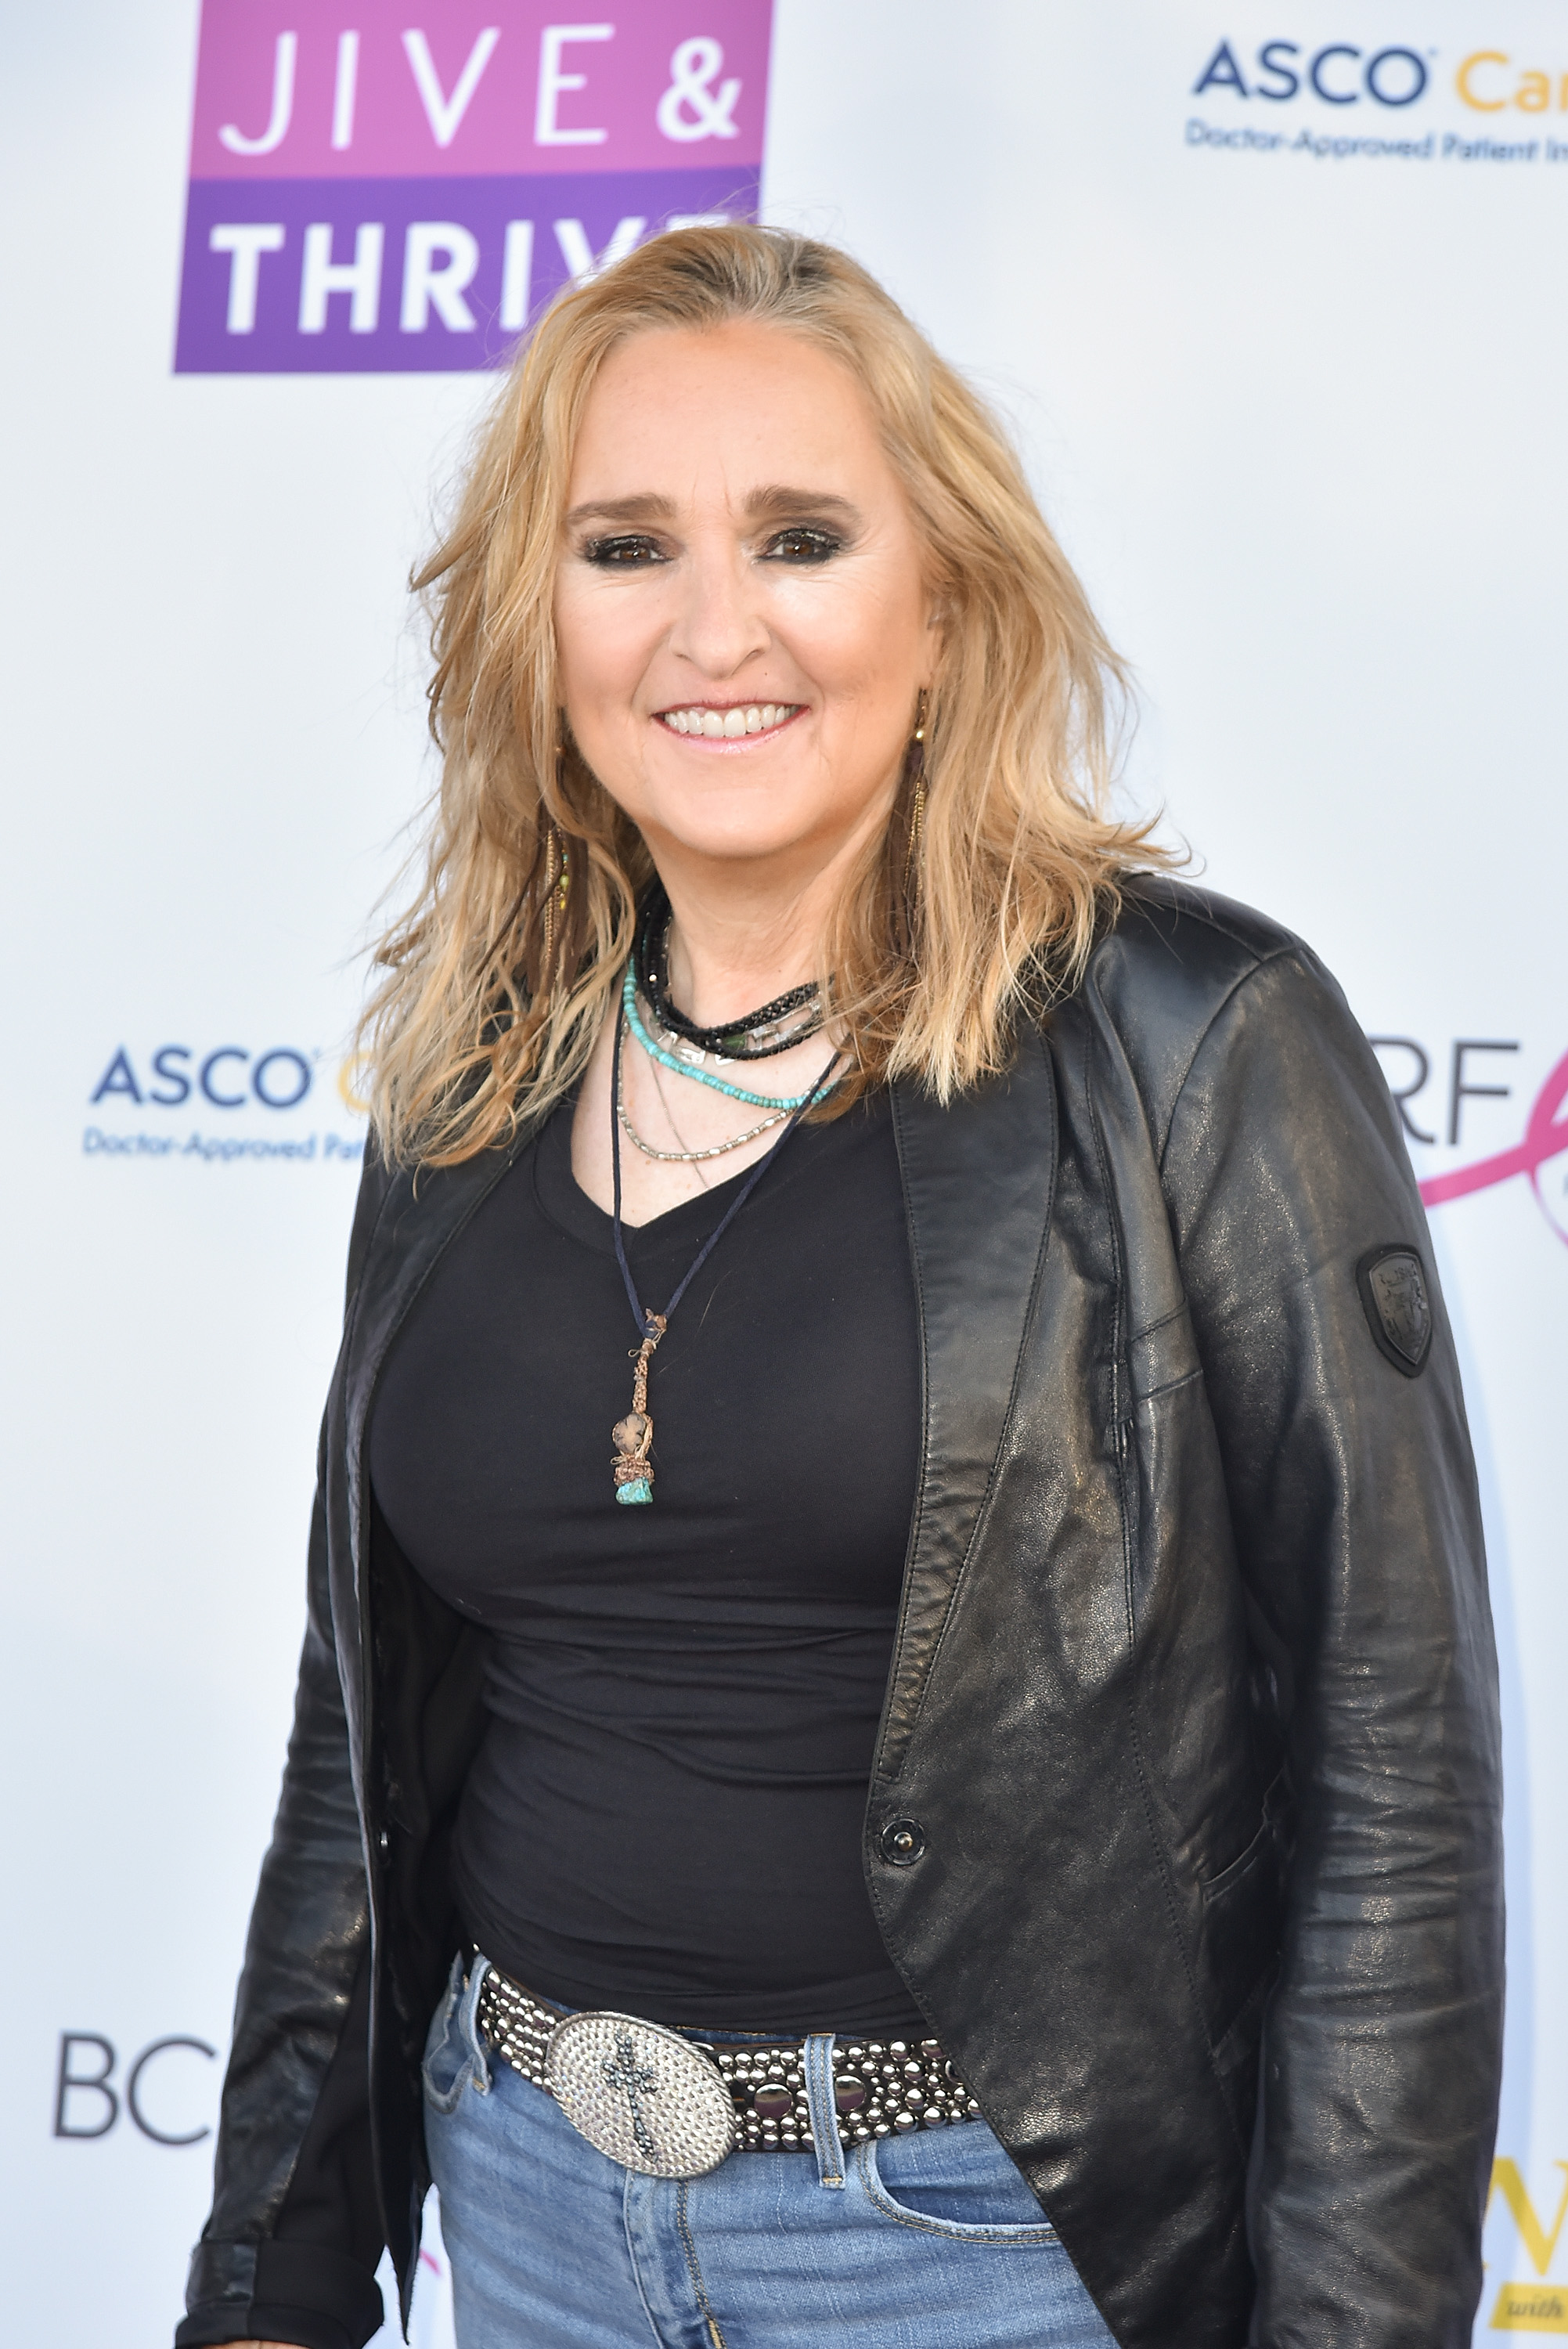 Melissa Ethridge attends "Jump, Jive, and Thrive" at Pauley Pavilion in Los Angeles, California, on October 8, 2017. | Source: Getty Images